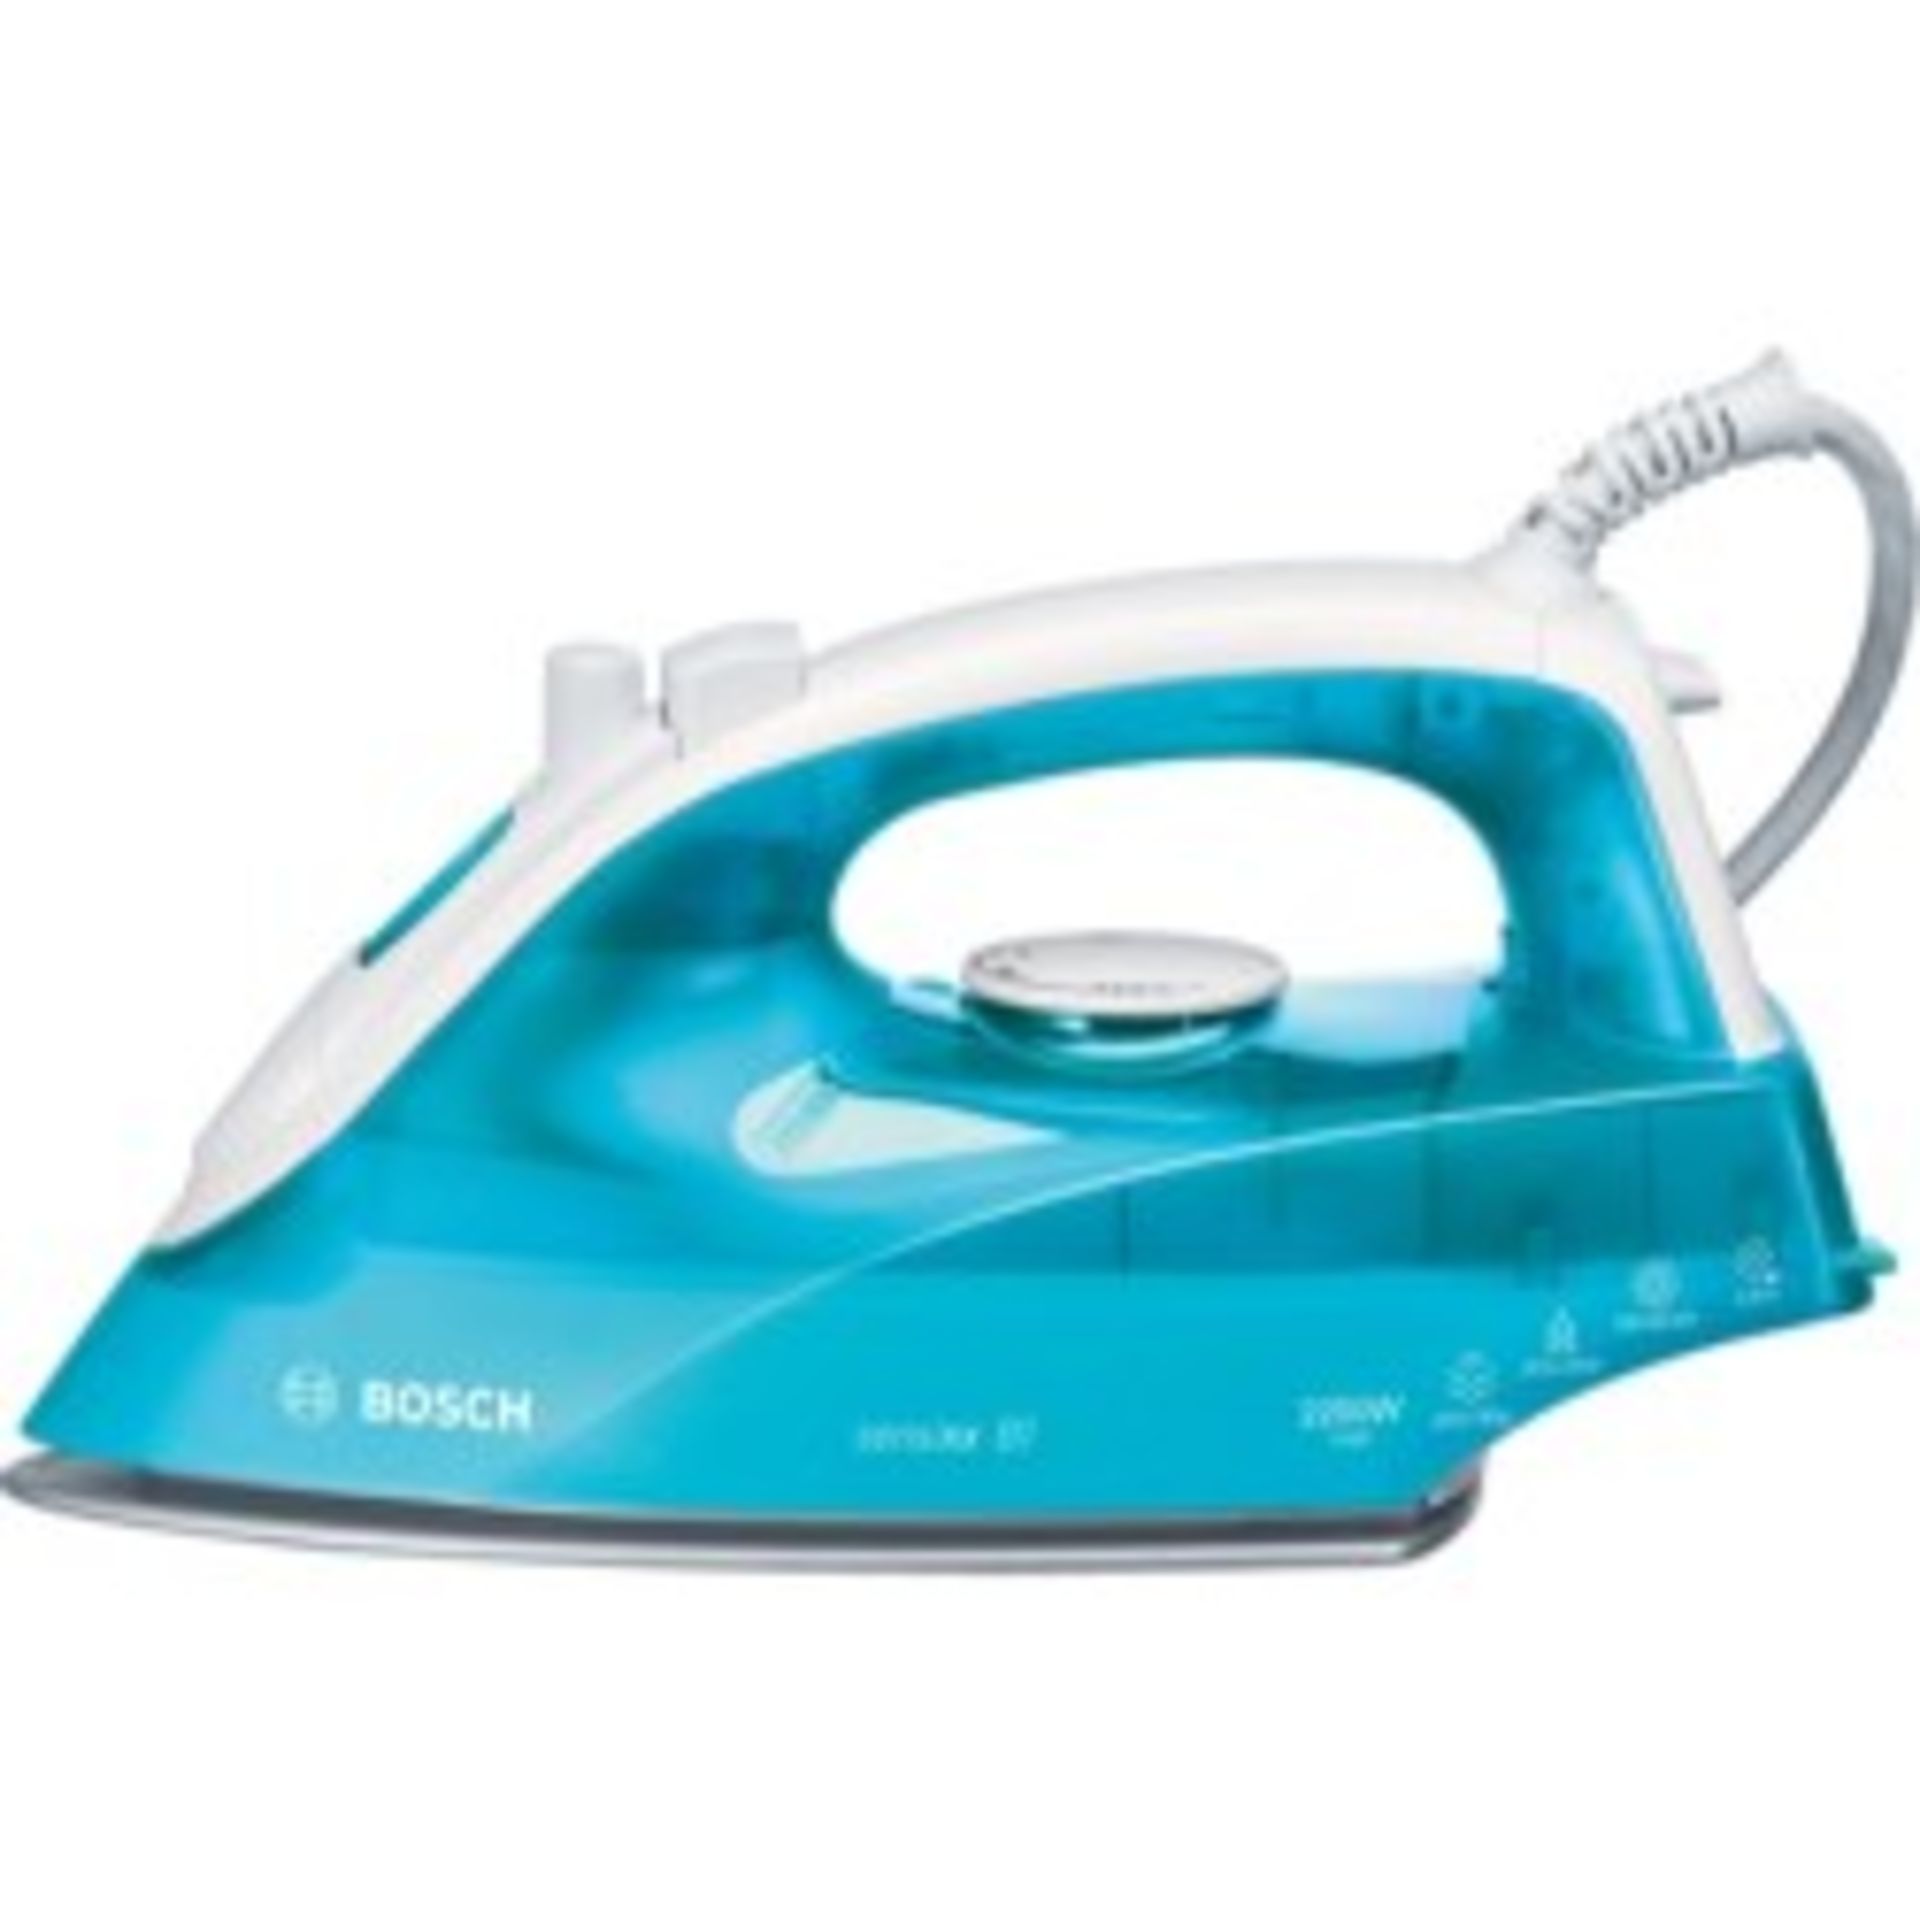 V Grade A/B Bosch Steam Iron TDA2633 With Ceramic Sole Plate RRP29.50 Colour May Vary